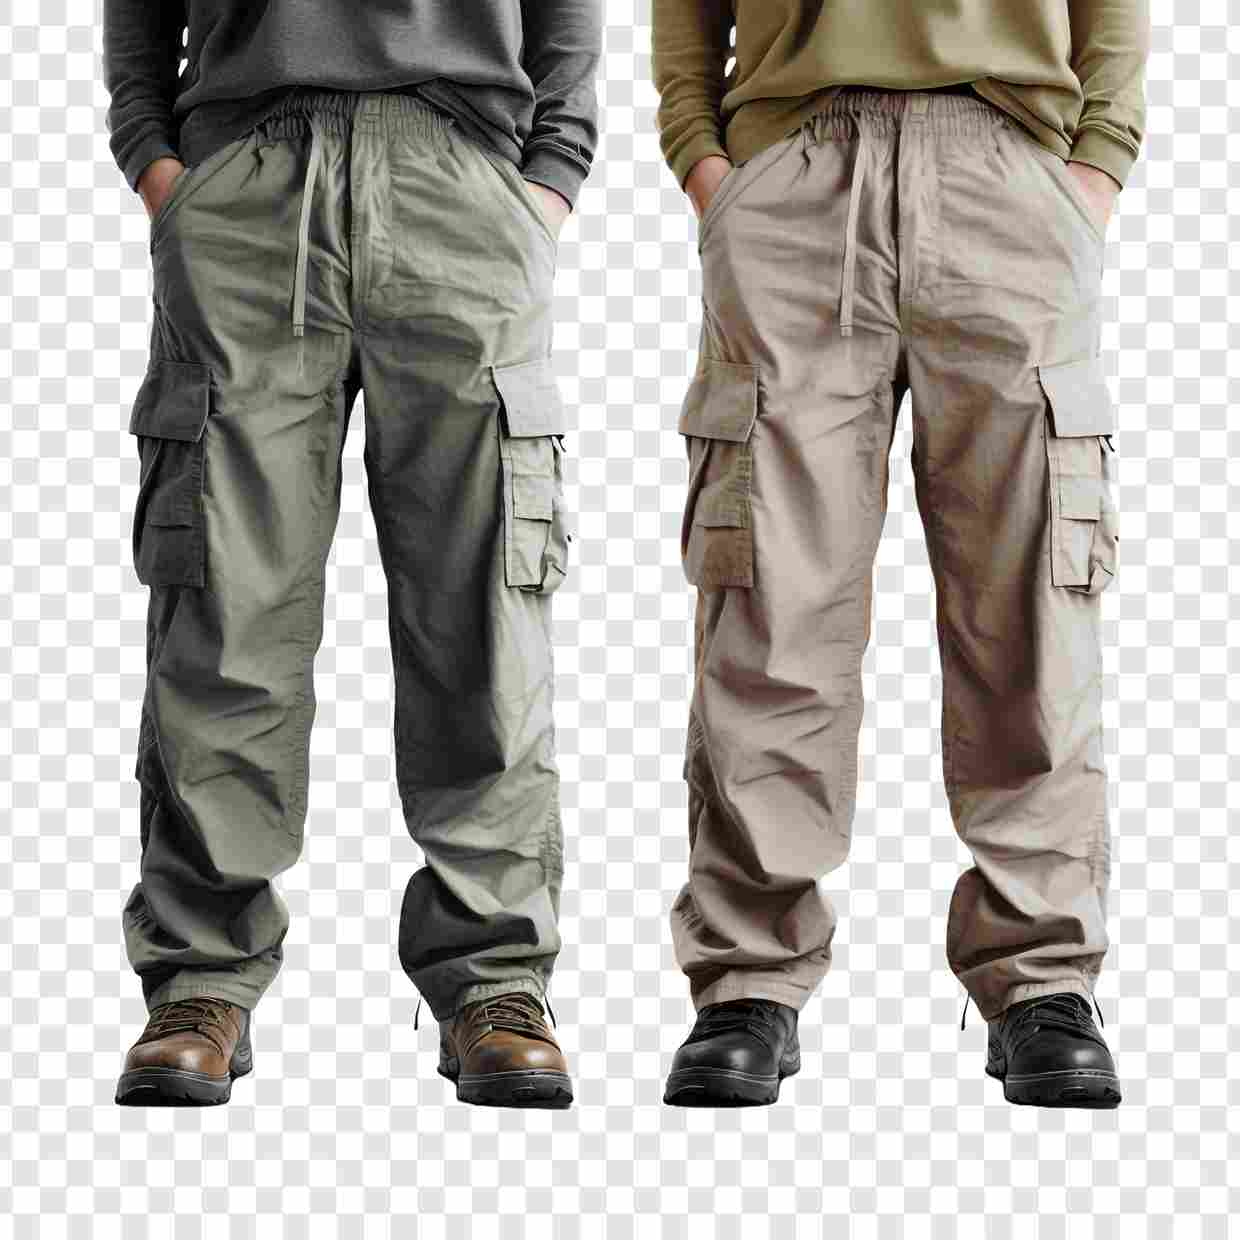 Top 10 Dennis Men Cargo Trousers Styles for Every Occasion